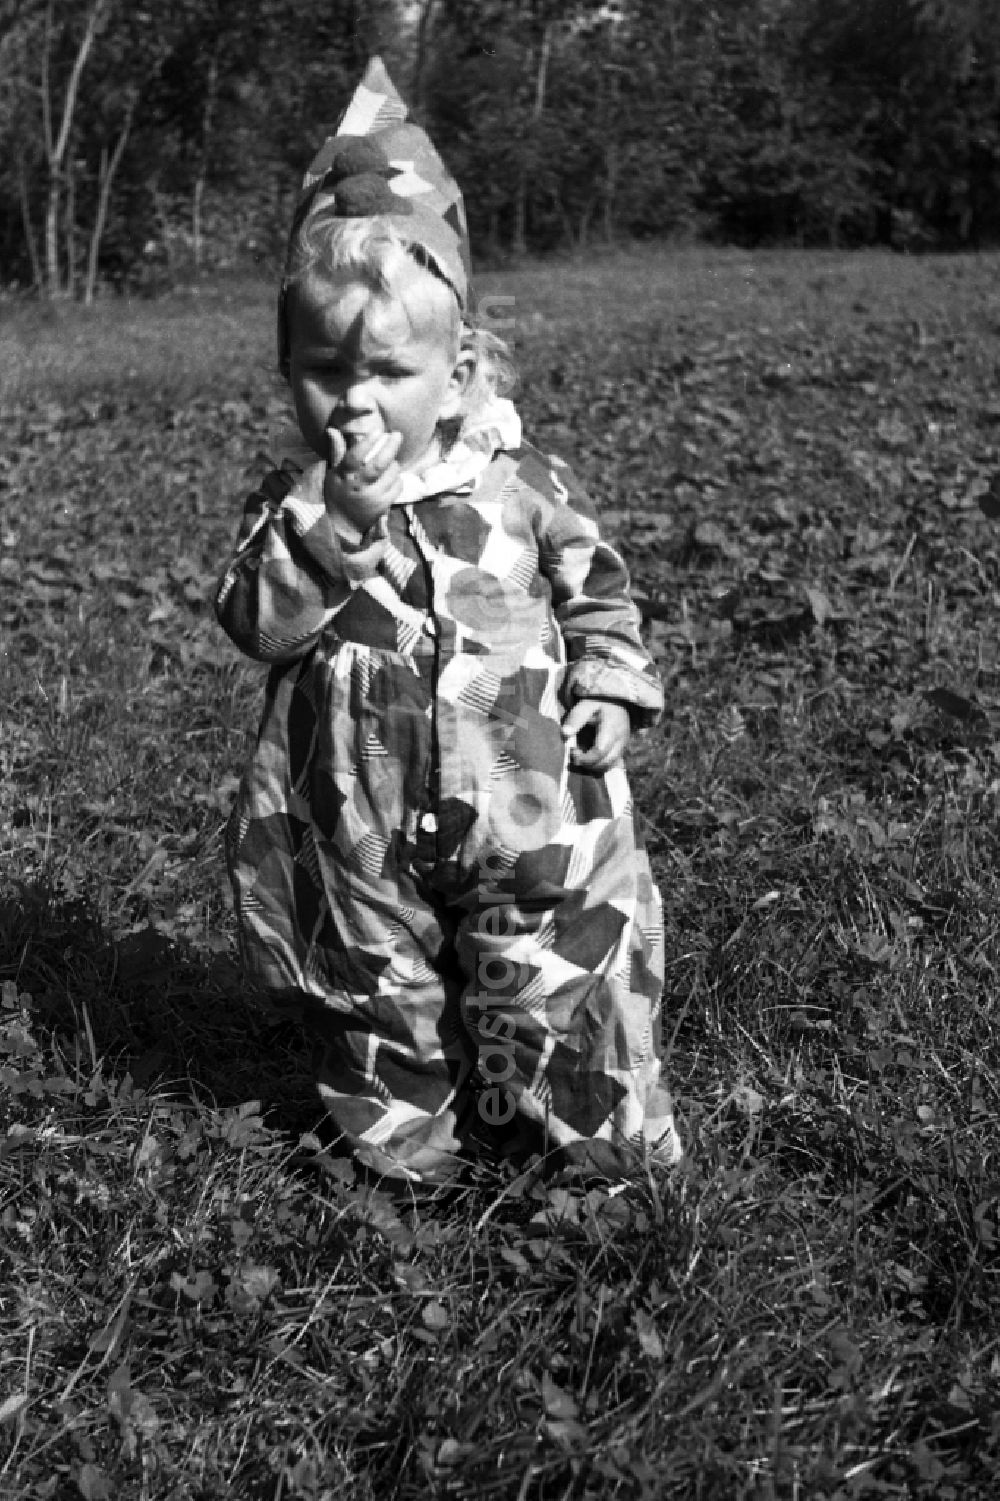 GDR image archive: Merseburg - A small child dresses up as a clown in Merseburg in the federal state Saxony-Anhalt in Germany